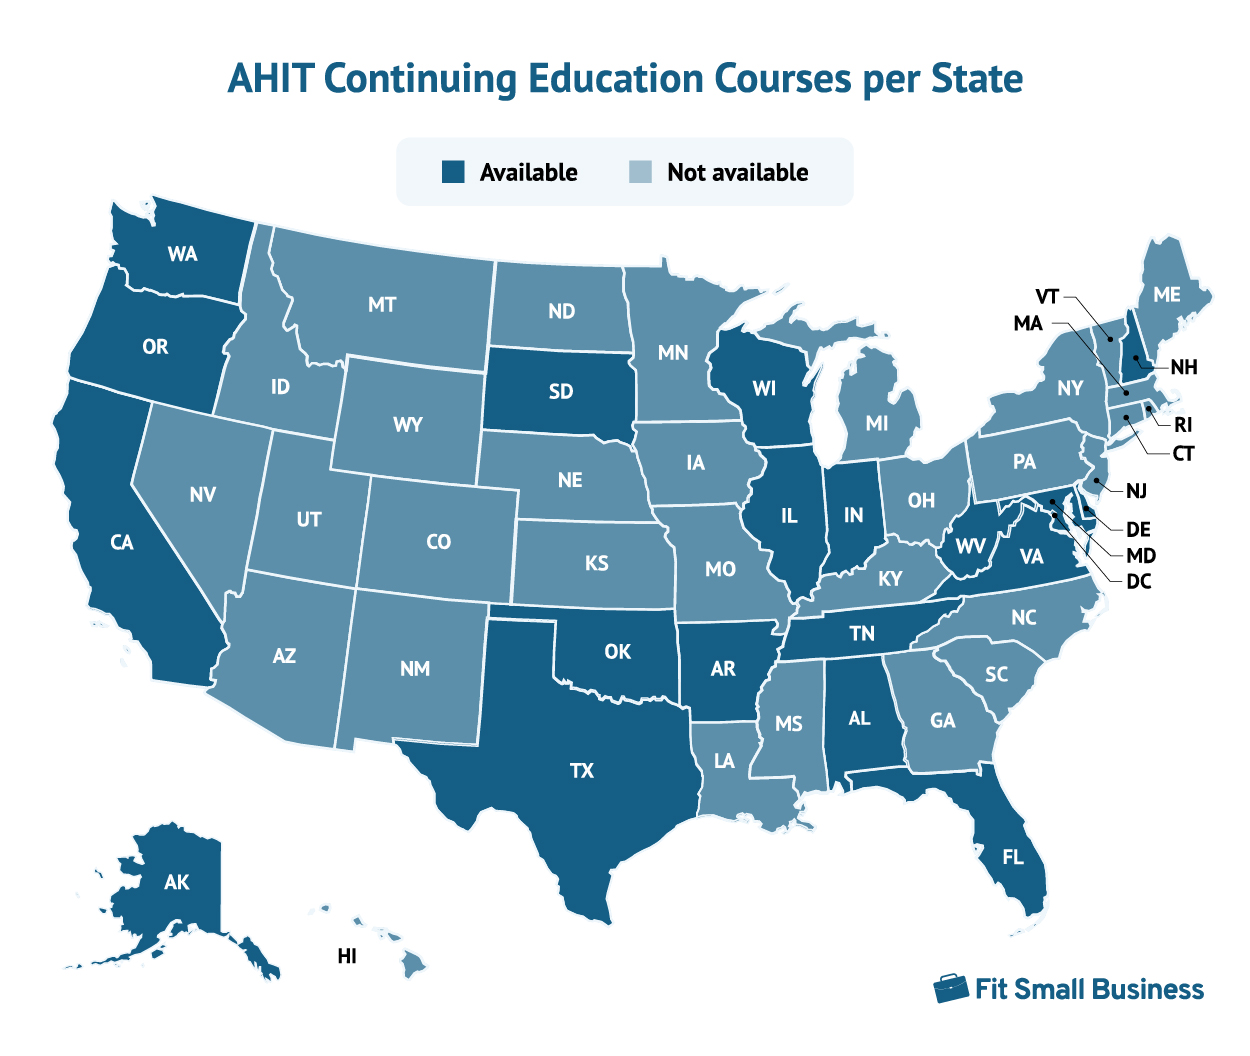 The map showing for a AHIT Continuing Education Courses per State.